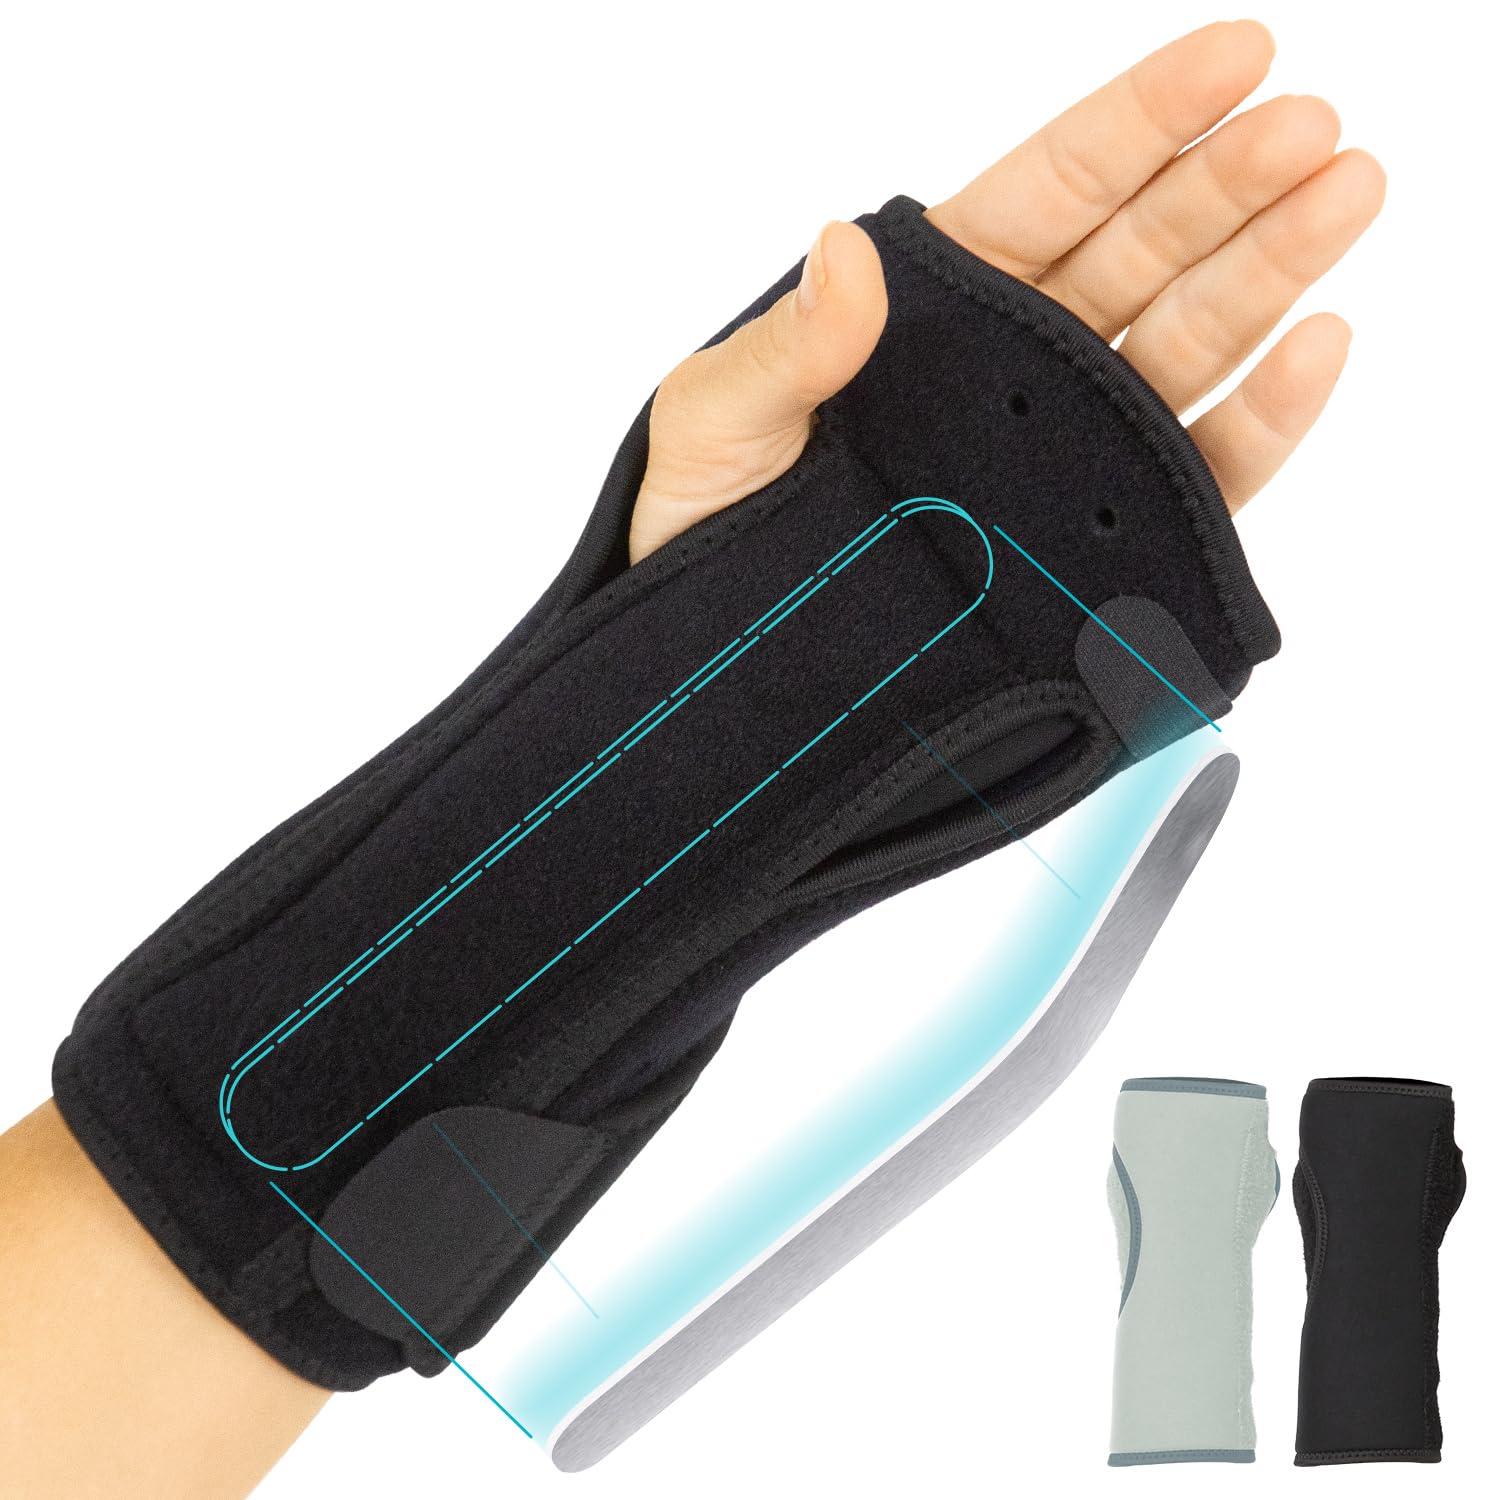 Nighttime Remedies for Carpal Tunnel Relief - Vive Health